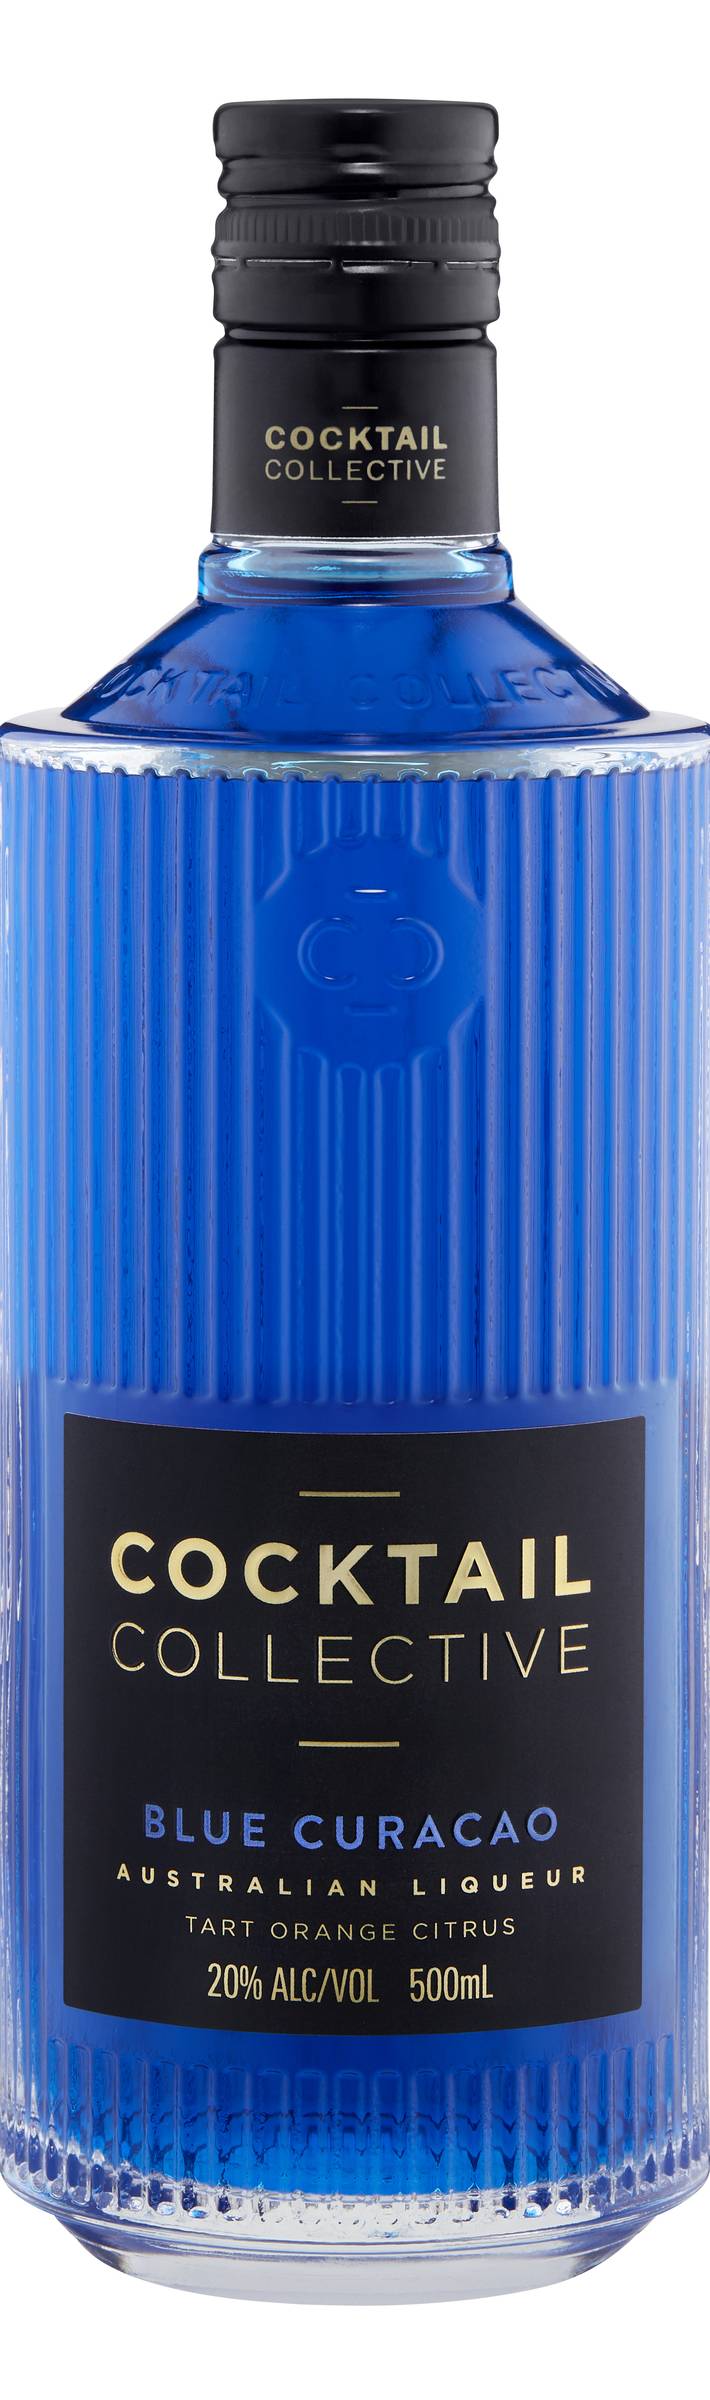 Cocktail Collective Blue Curacao 500ml